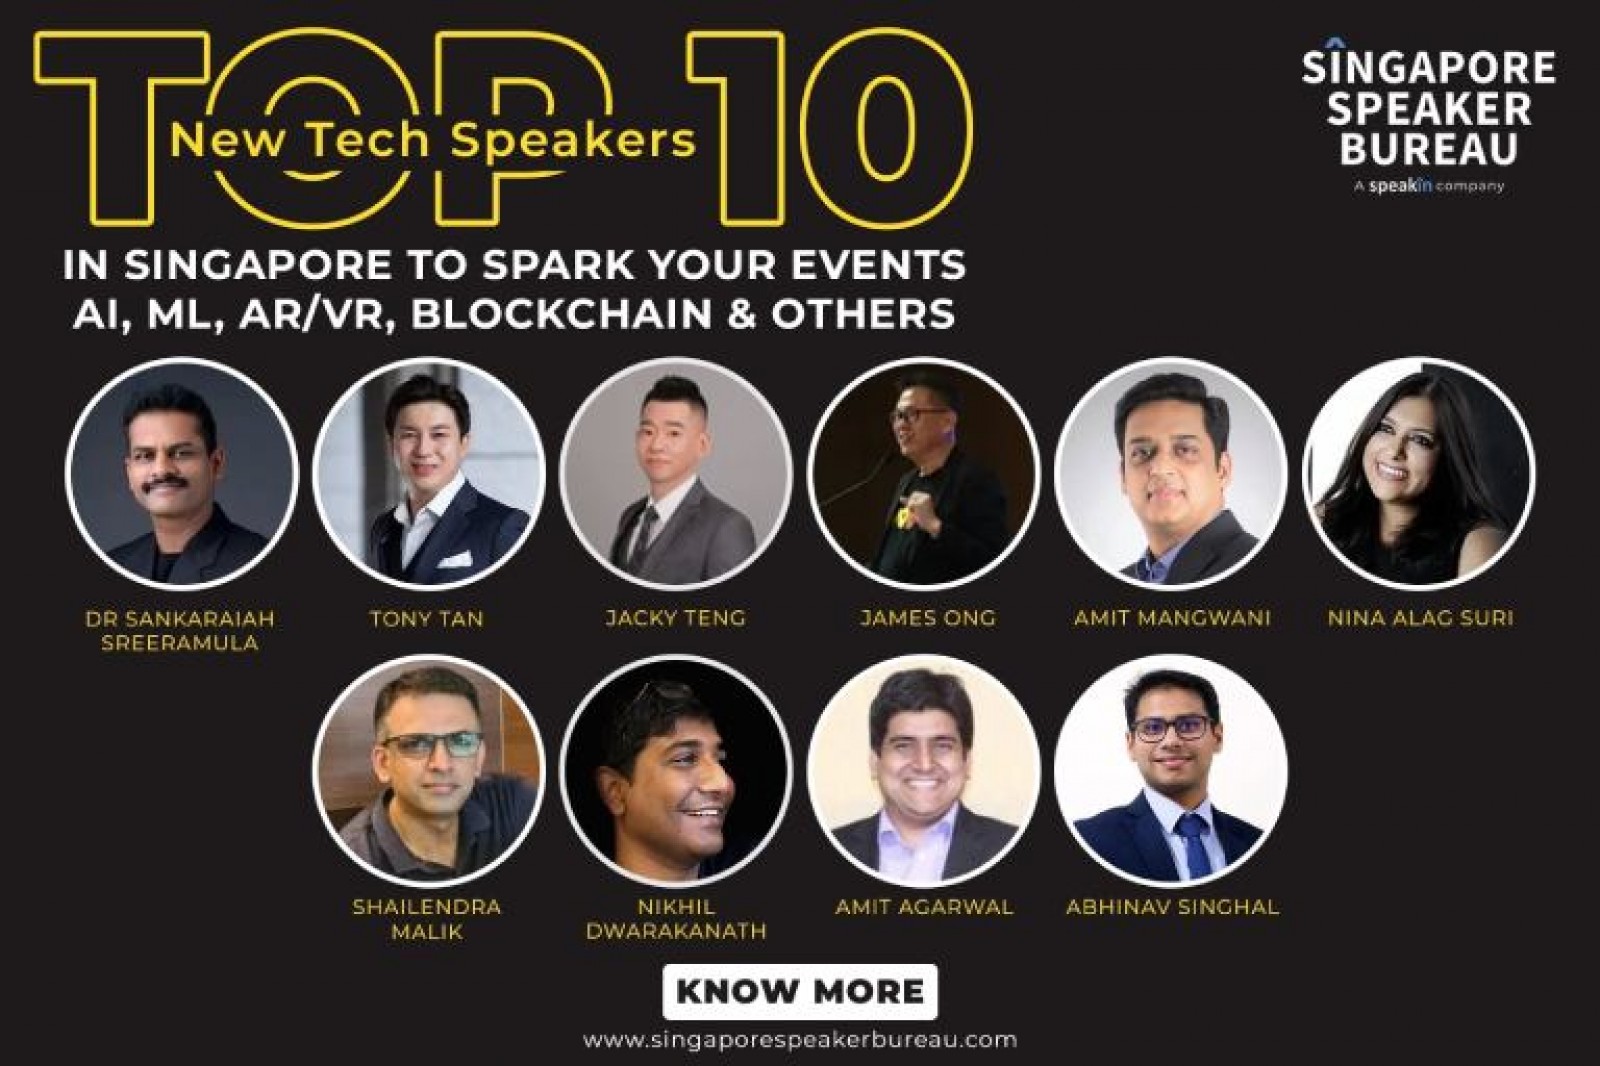 Top 10 New Tech Speakers in Singapore to Spark Your Events: AI, ML, AR/VR, Blockchain & Others